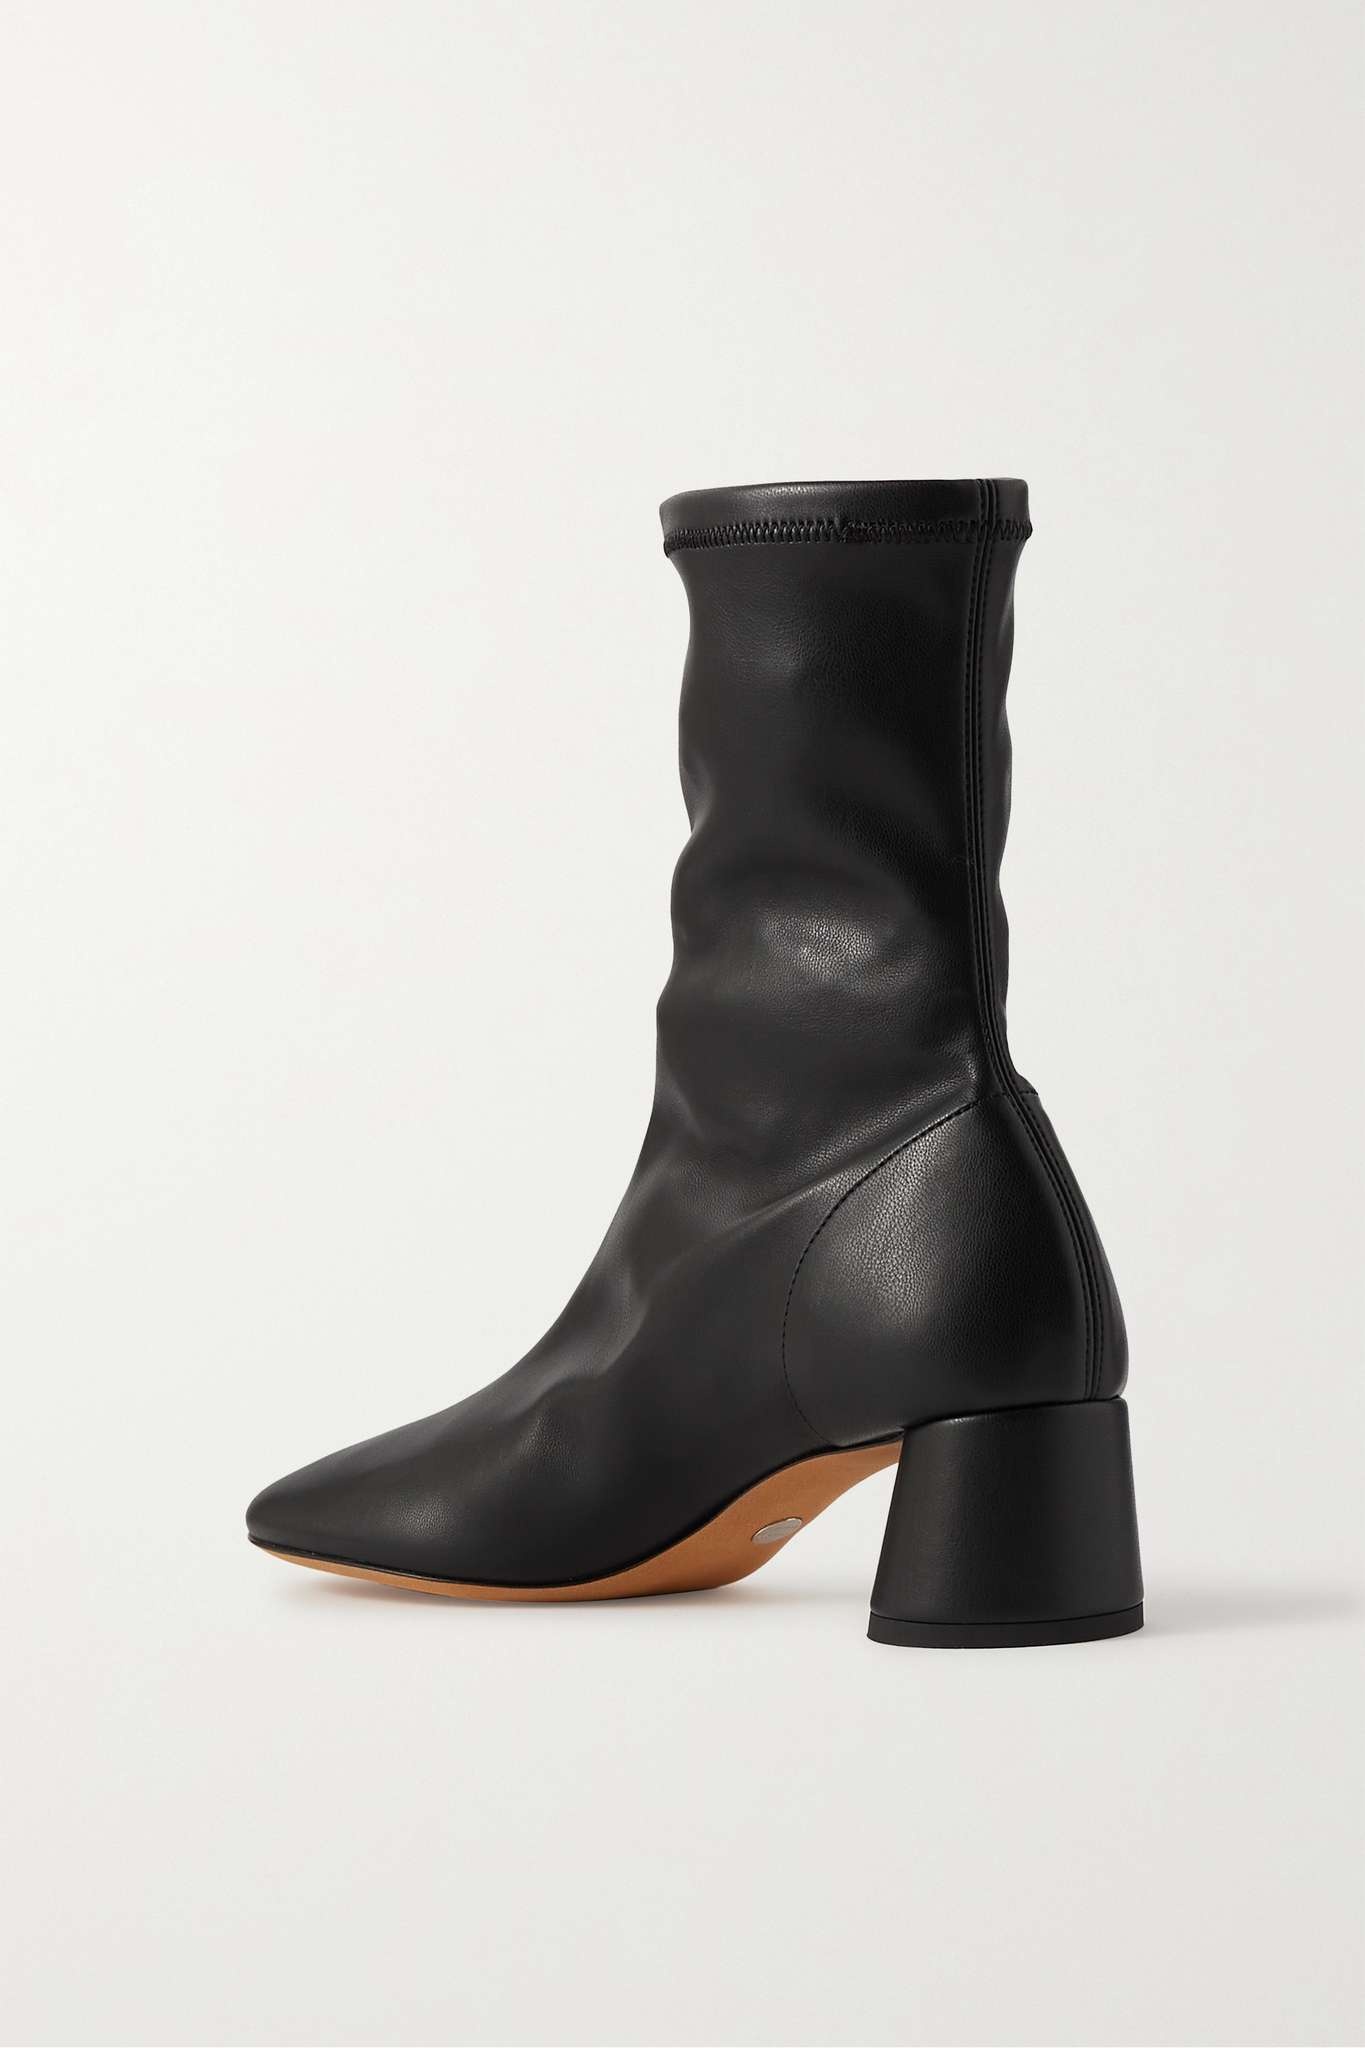 Glove leather ankle boots - 3